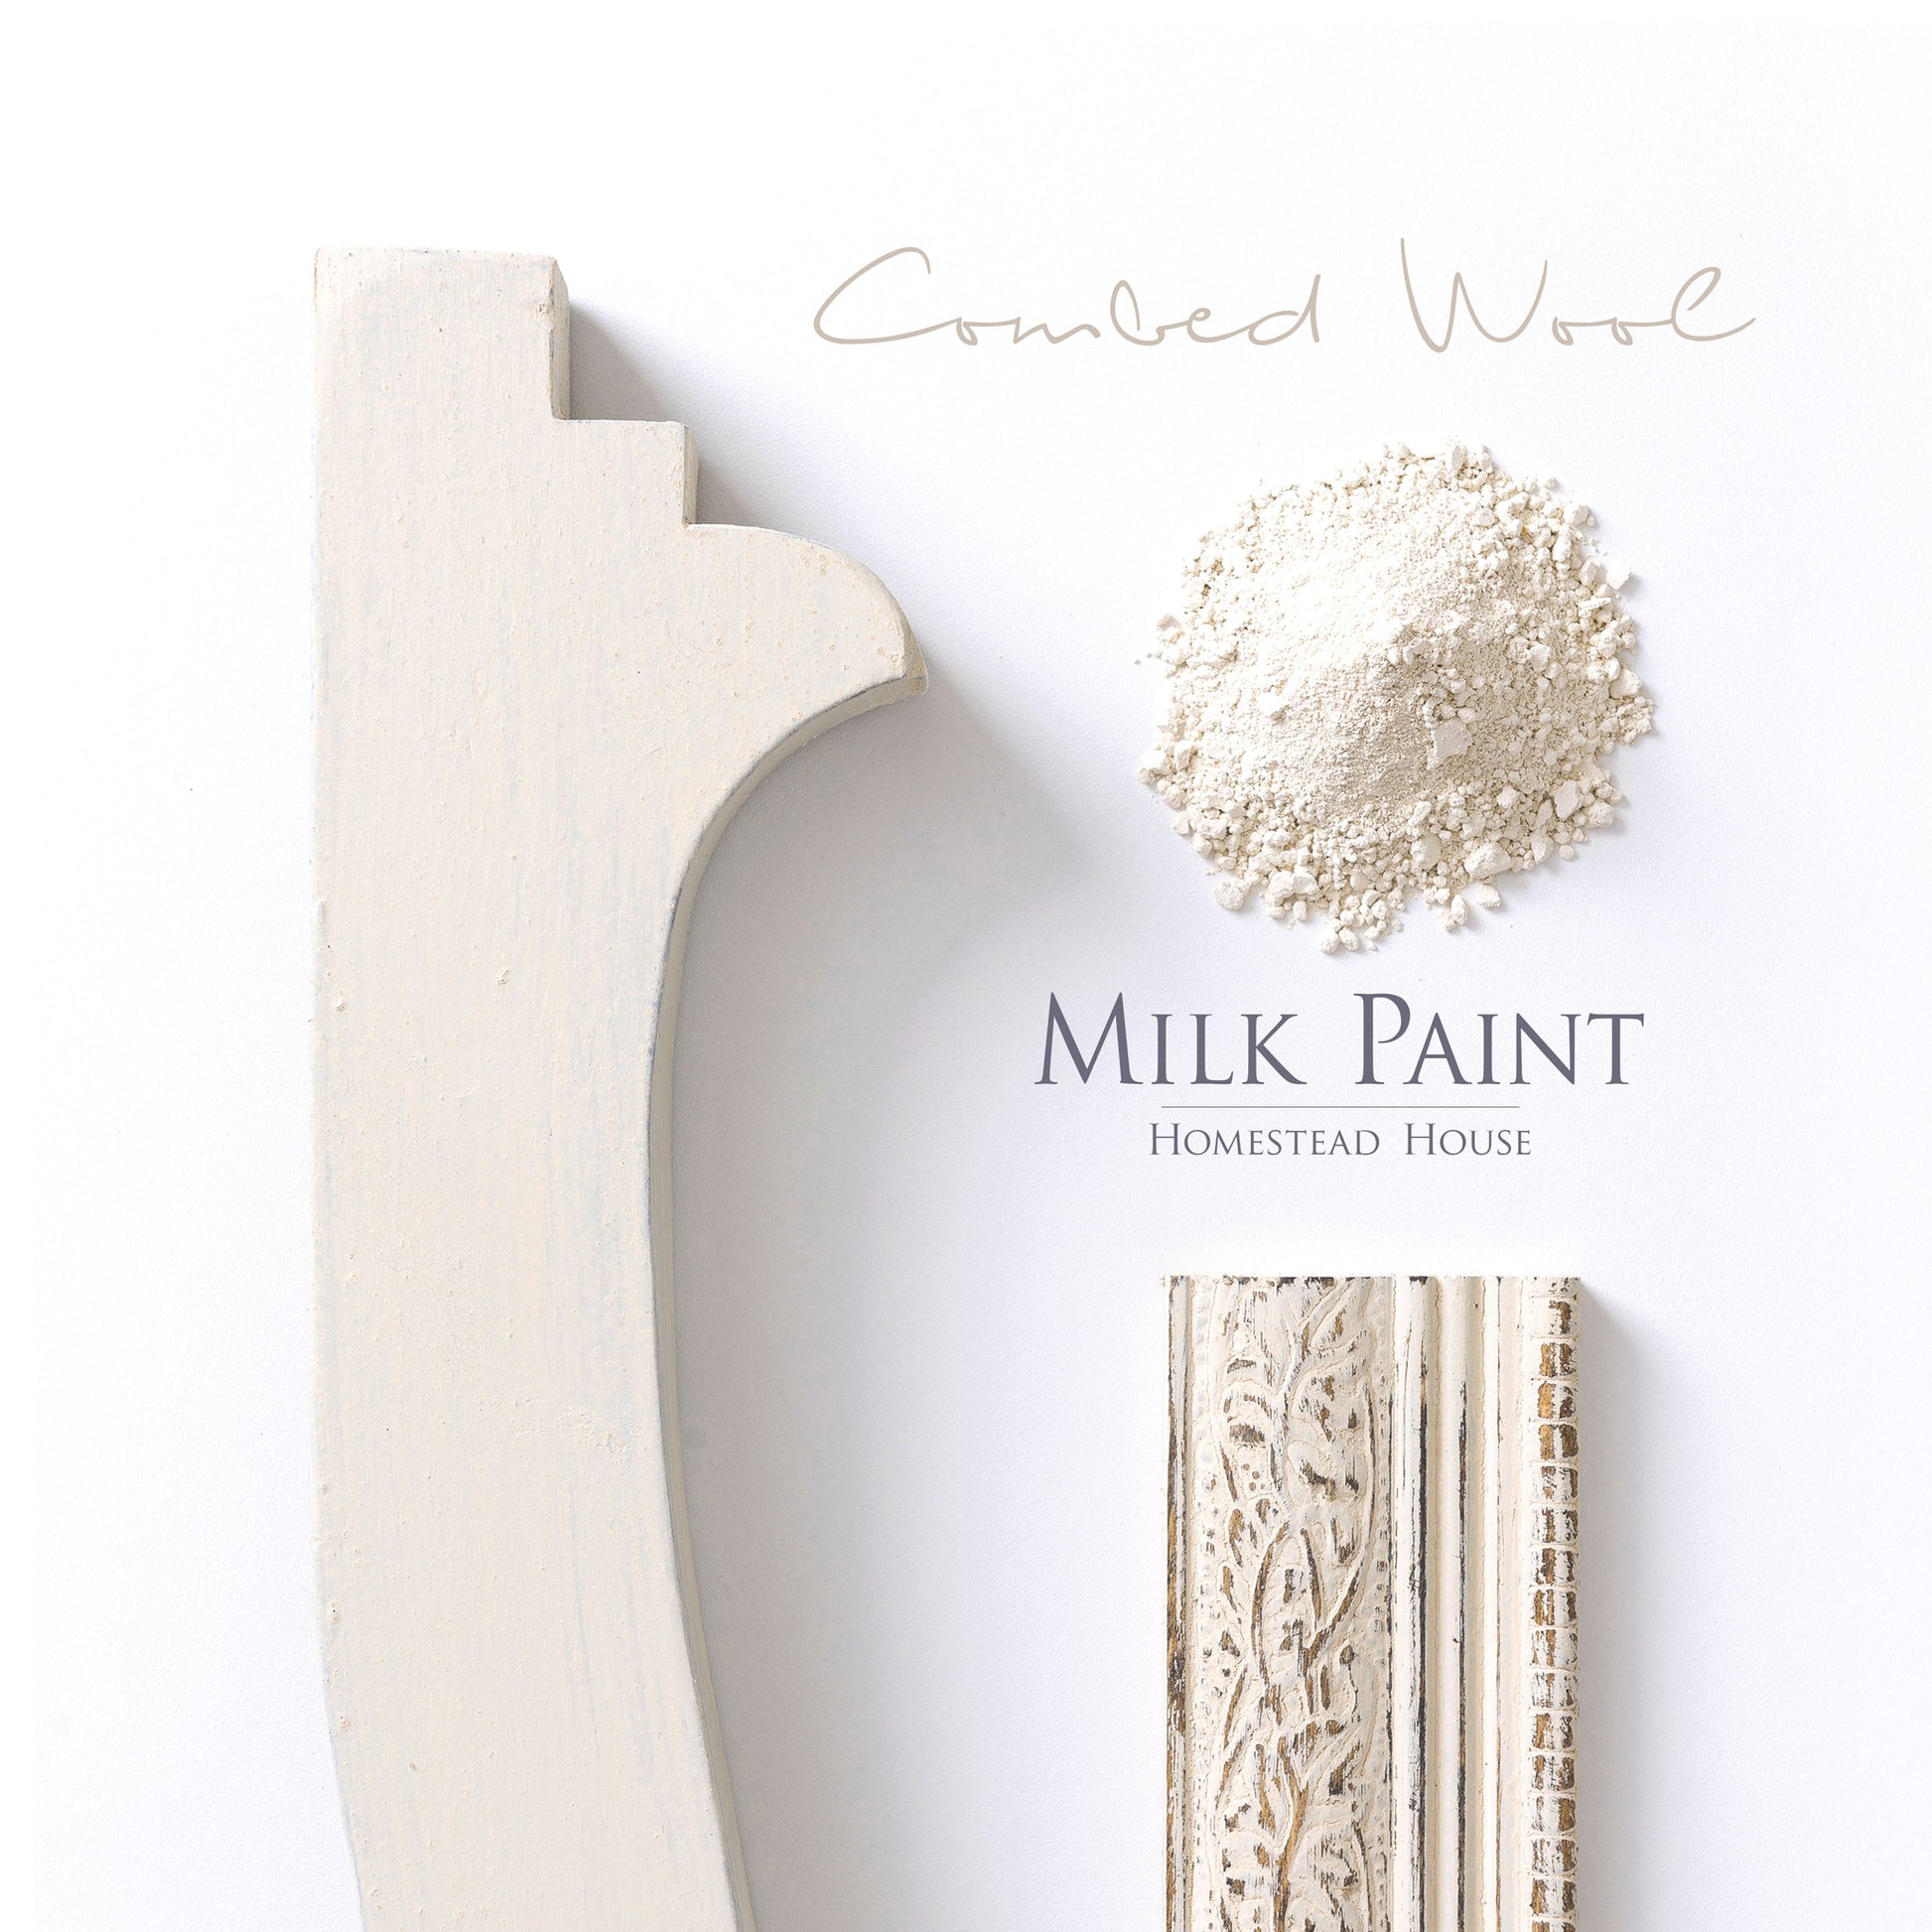 Milk Paint from Homestead House in Combed Wool, a muted aged yellow with a hint of soft green.  |  homesteadhouse.ca